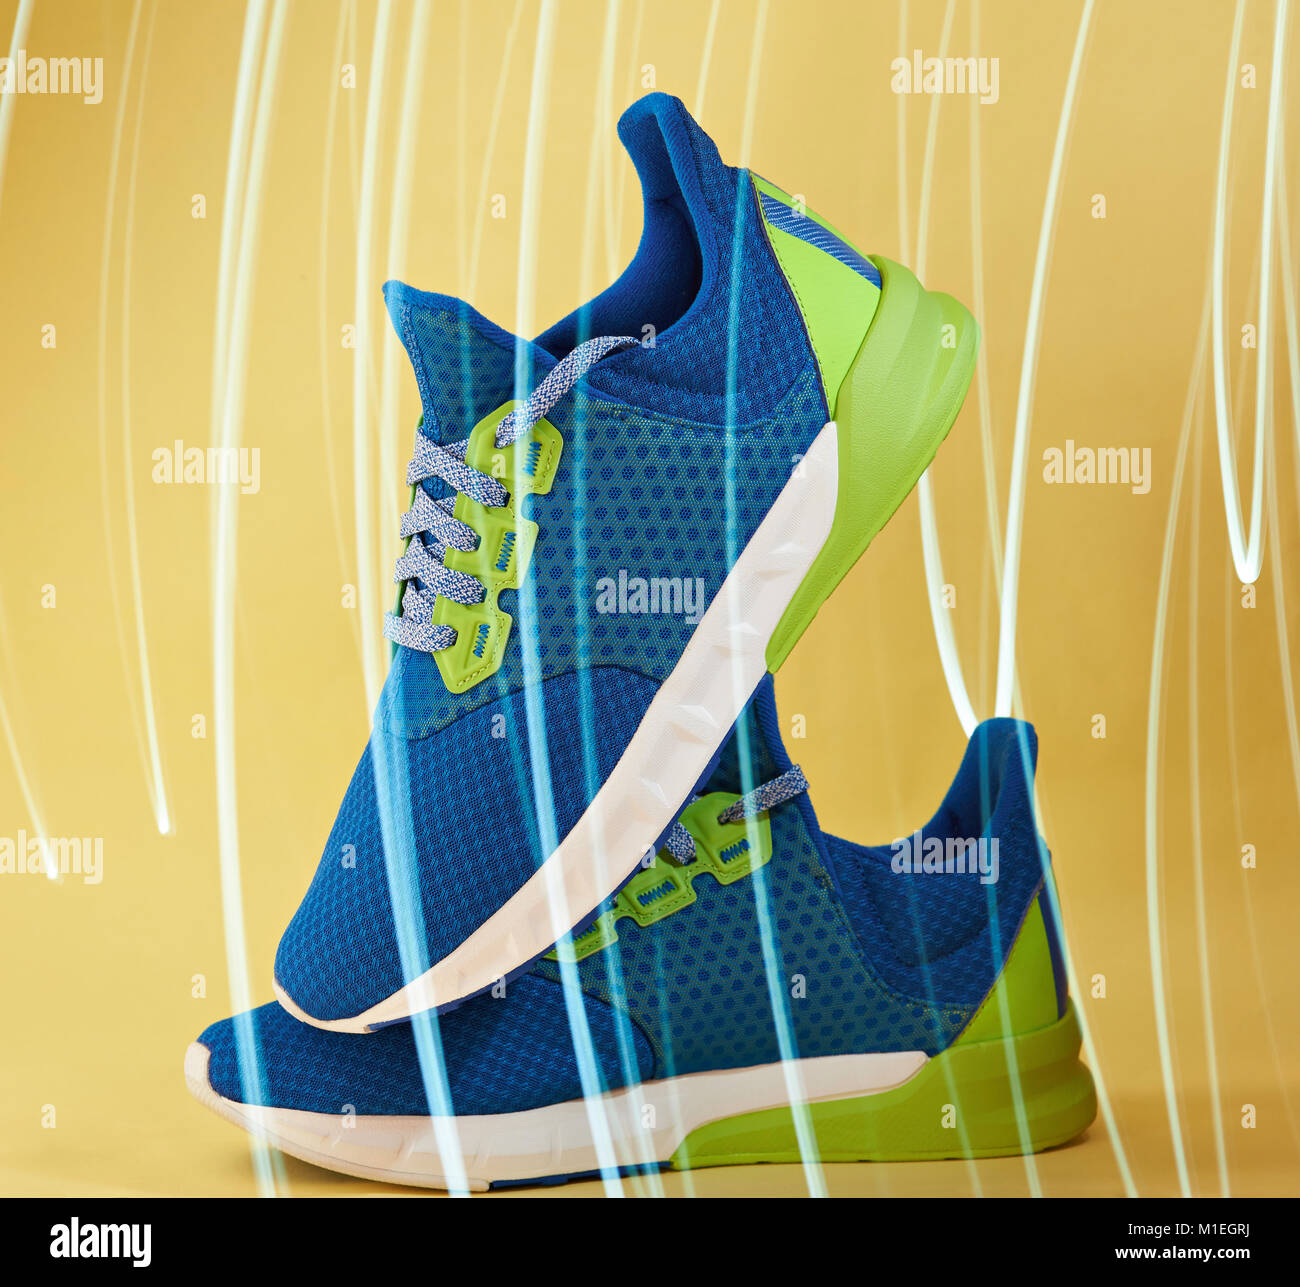 Blue pair of sneakers shoes on yellow background with illumination effect Stock Photo